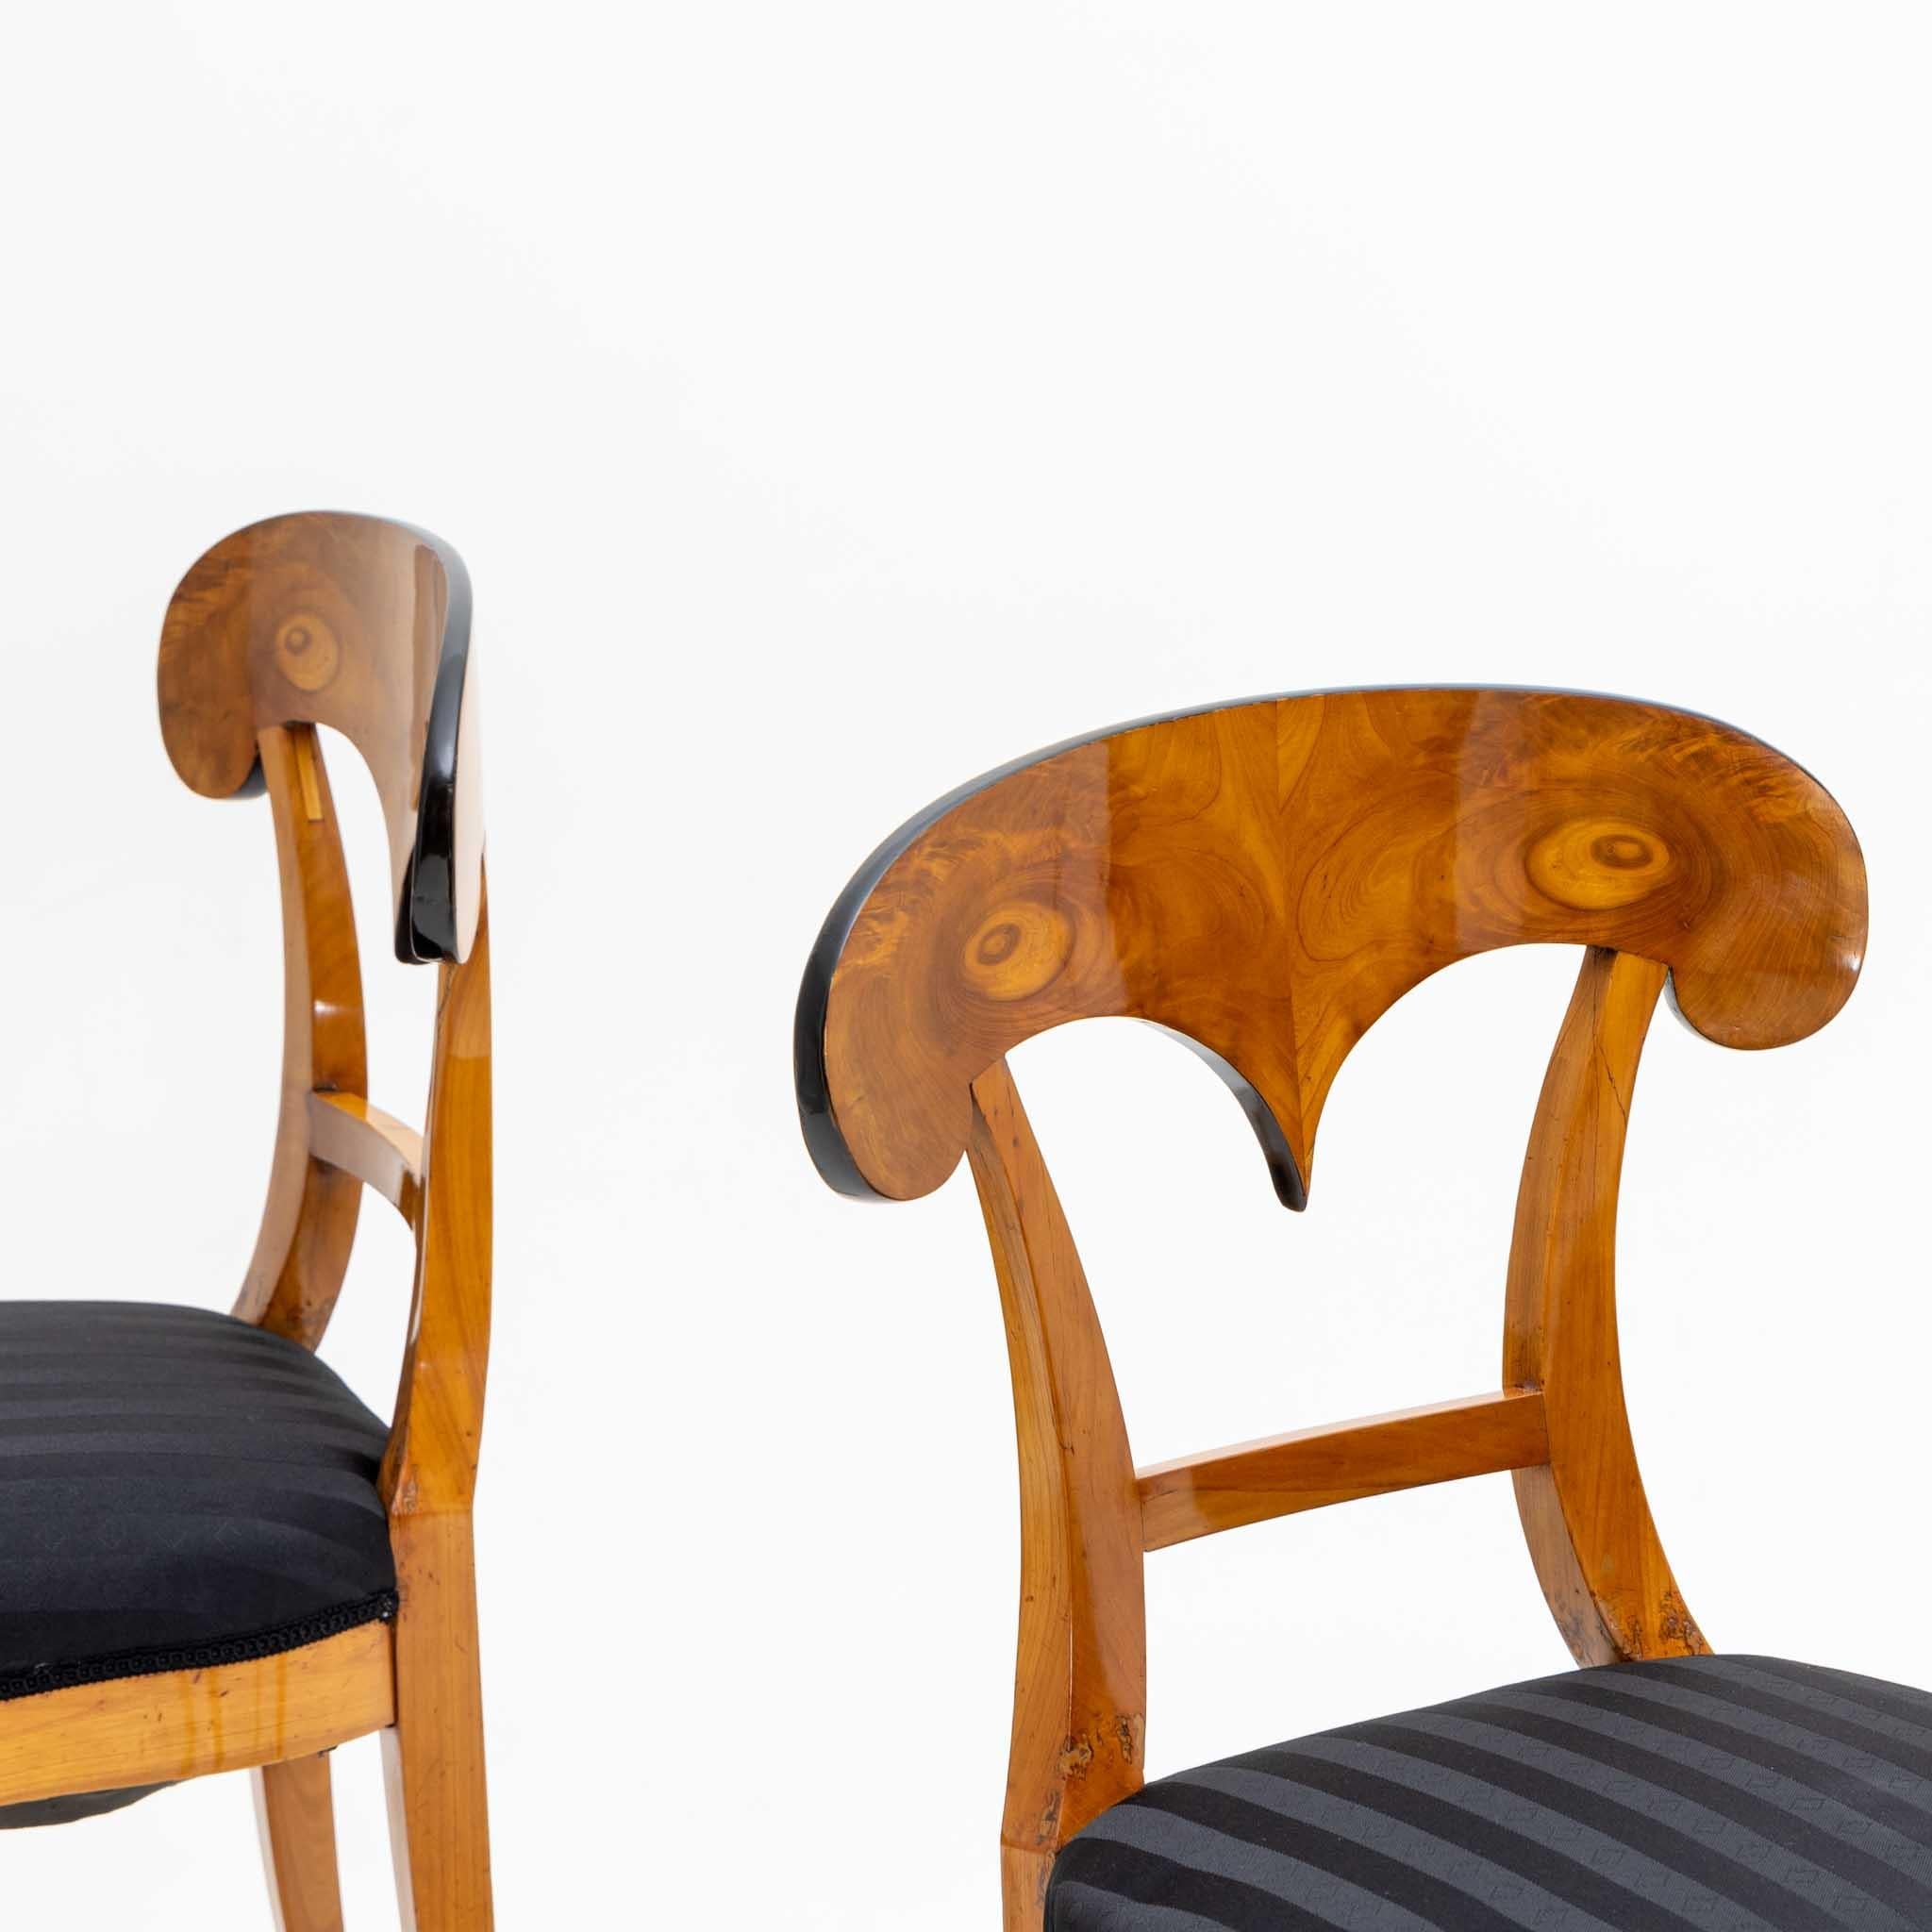 Pair of South German shovel chairs made of solid and veneered cherry wood. The shovel-shaped backs are symmetrically veneered and form a deep point downwards. The chairs have been newly upholstered in a black striped fabric and were completely hand